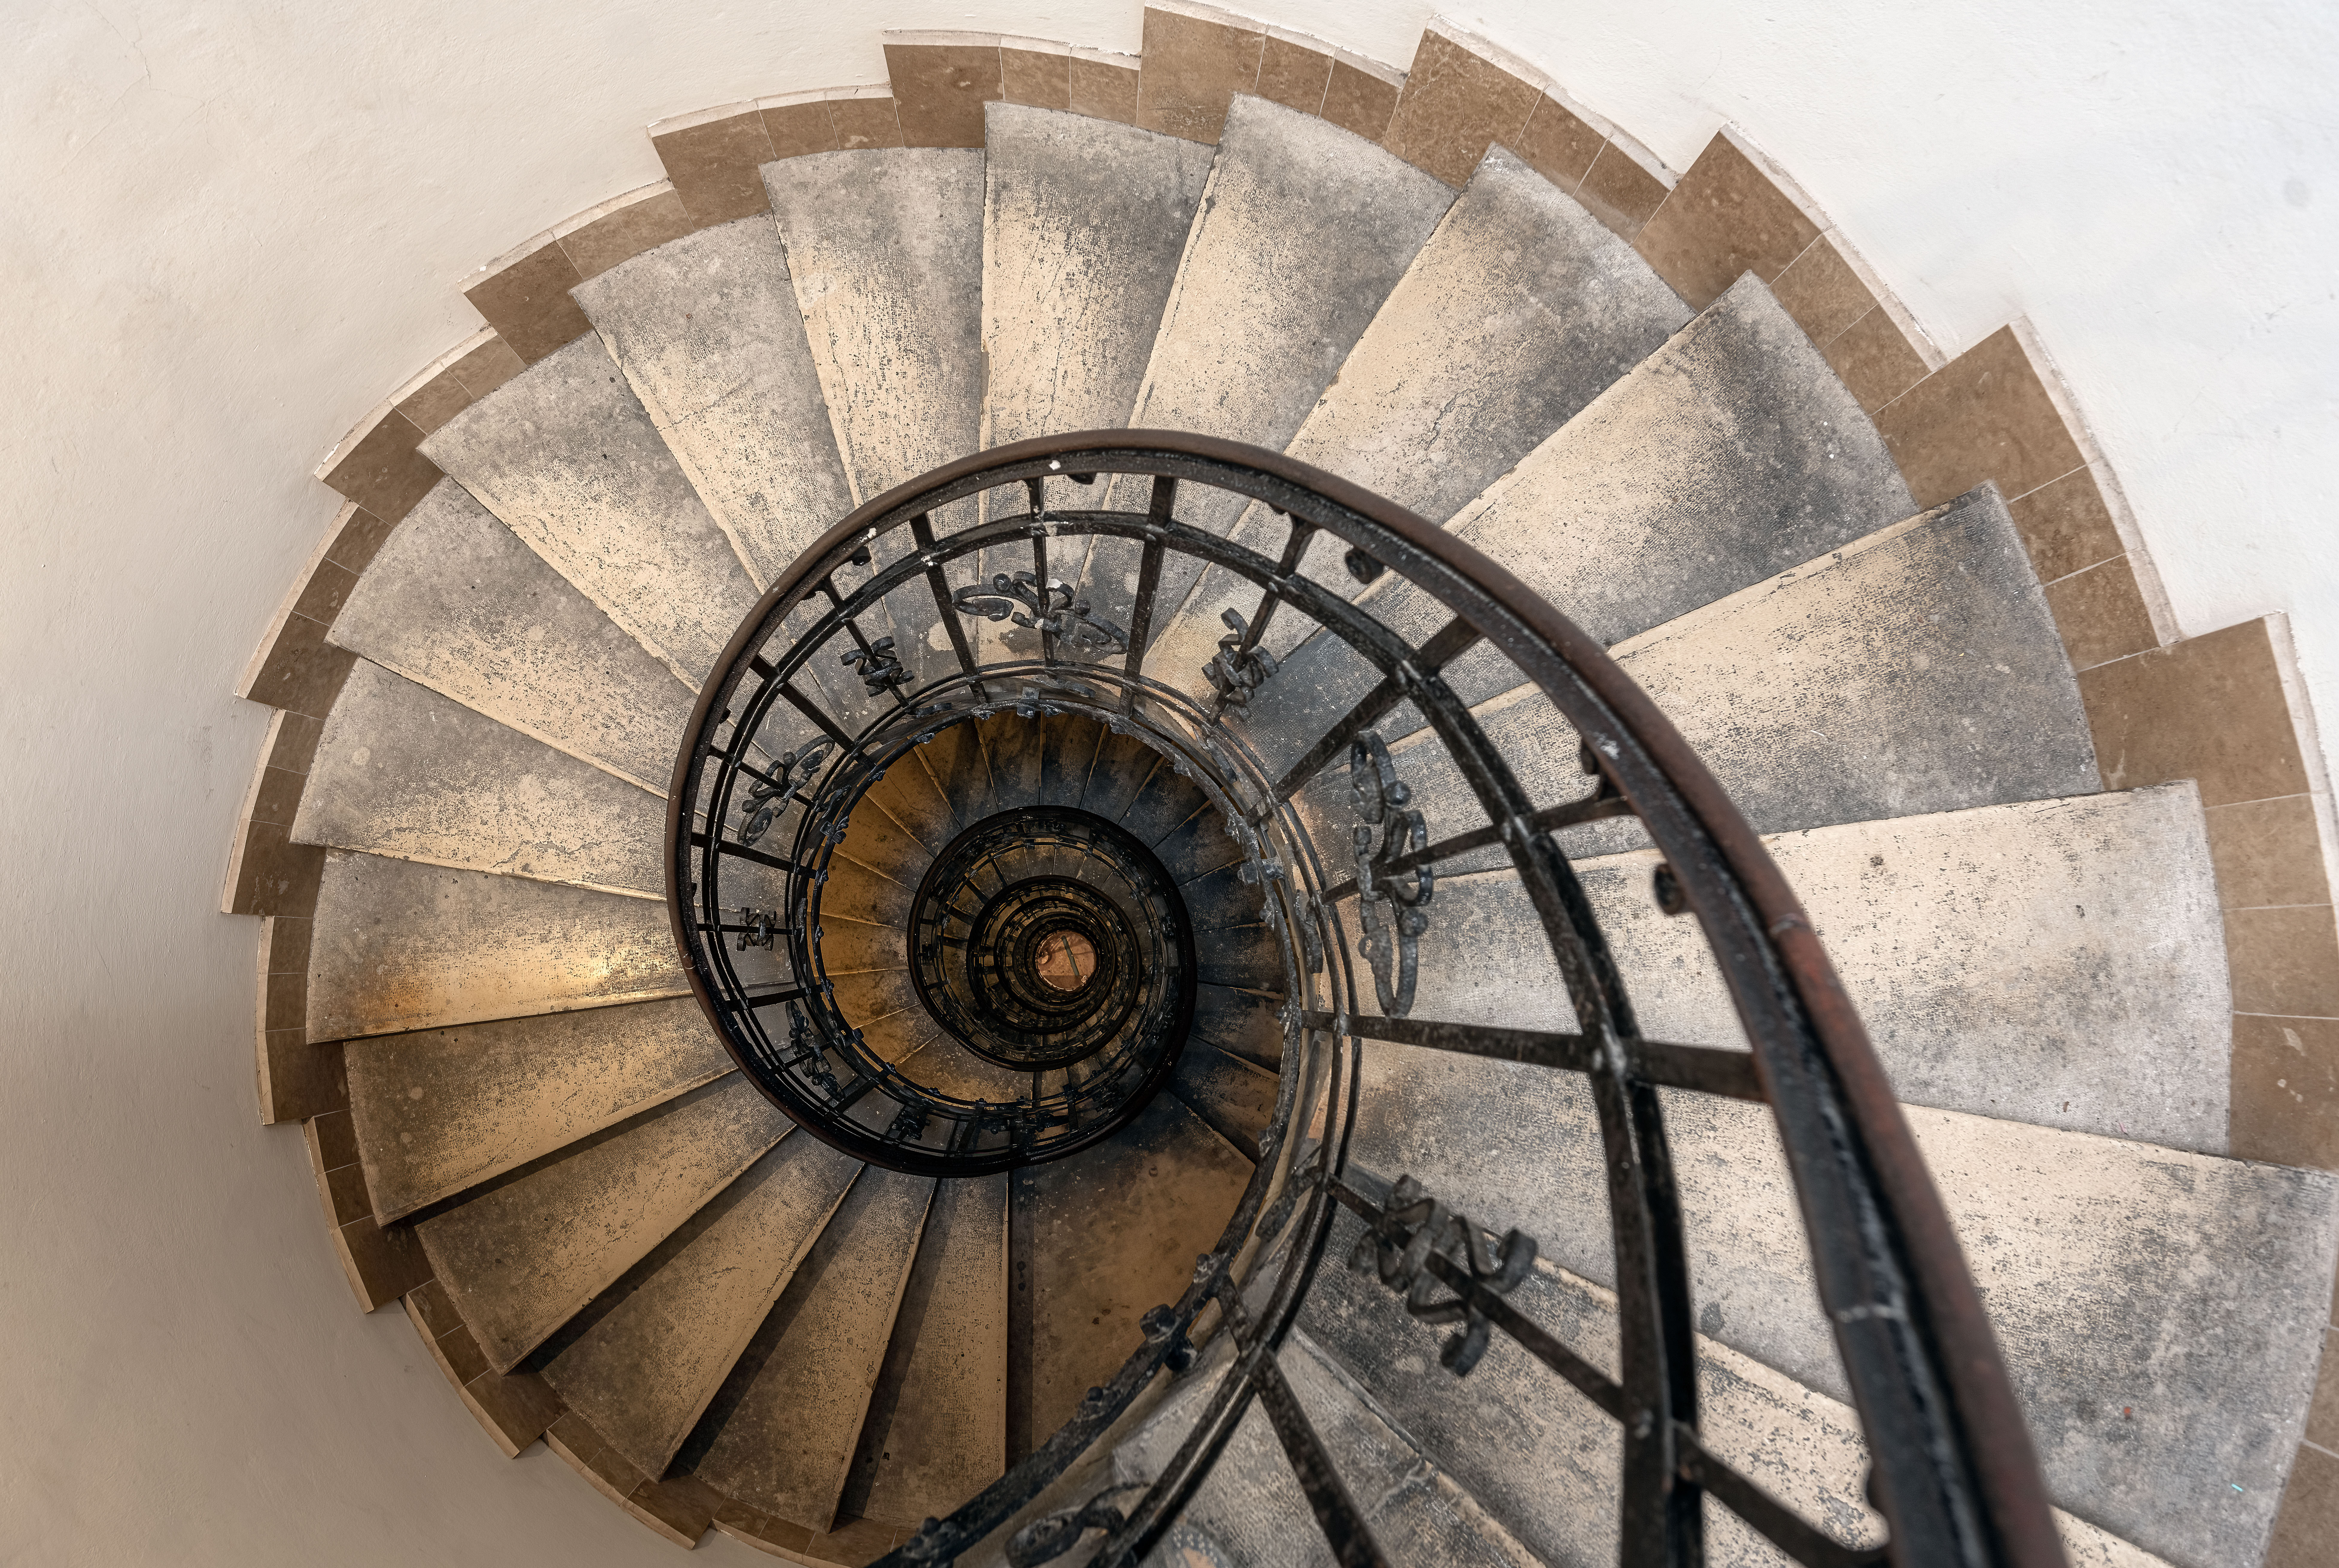 The spiral staircase to reach the roof of St Stephens Basilica